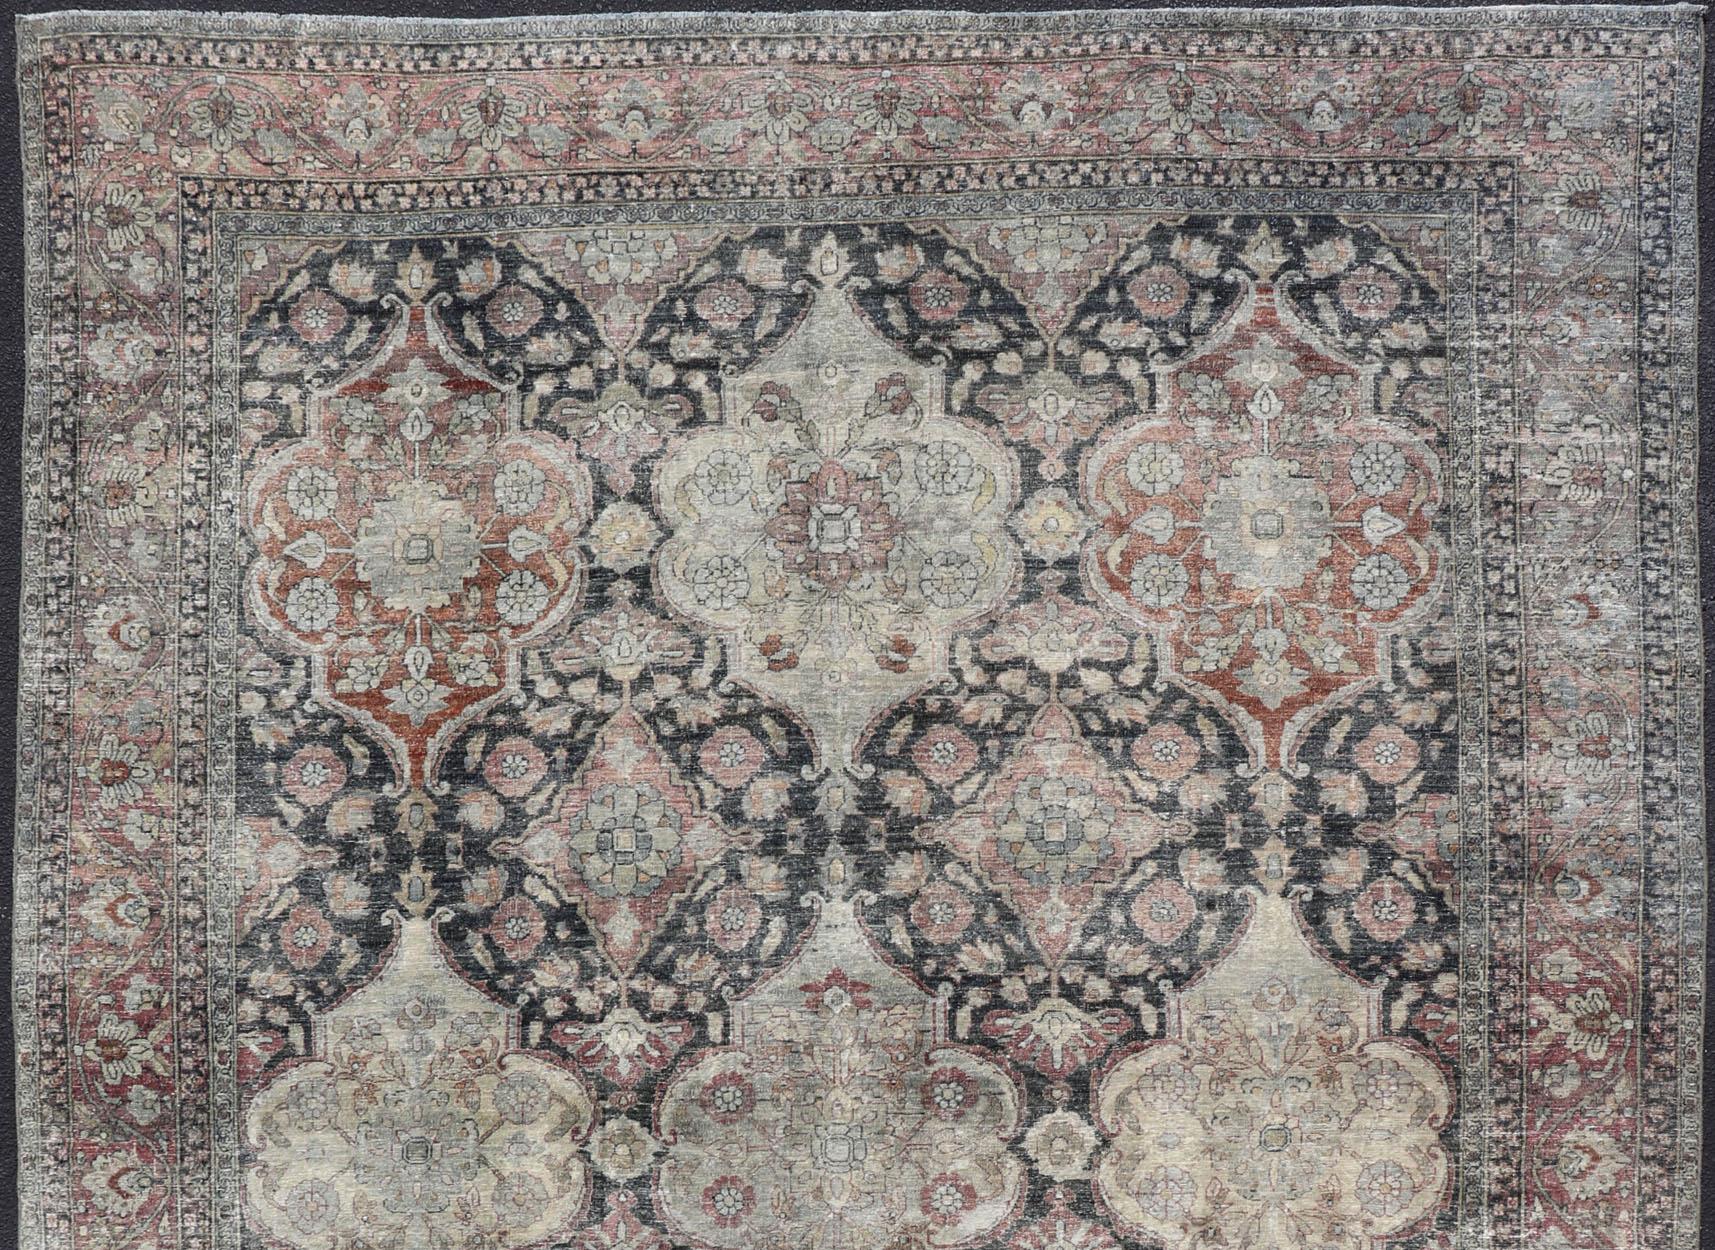 Distressed Persian antique Yazd carpet with geometric and floral design, rug R20-0703, country of origin / type: Iran / Tabriz, circa 1910

This antique Persian Yazd carpet (circa 1910) features a refined palate of various shades of Charcoal, warm